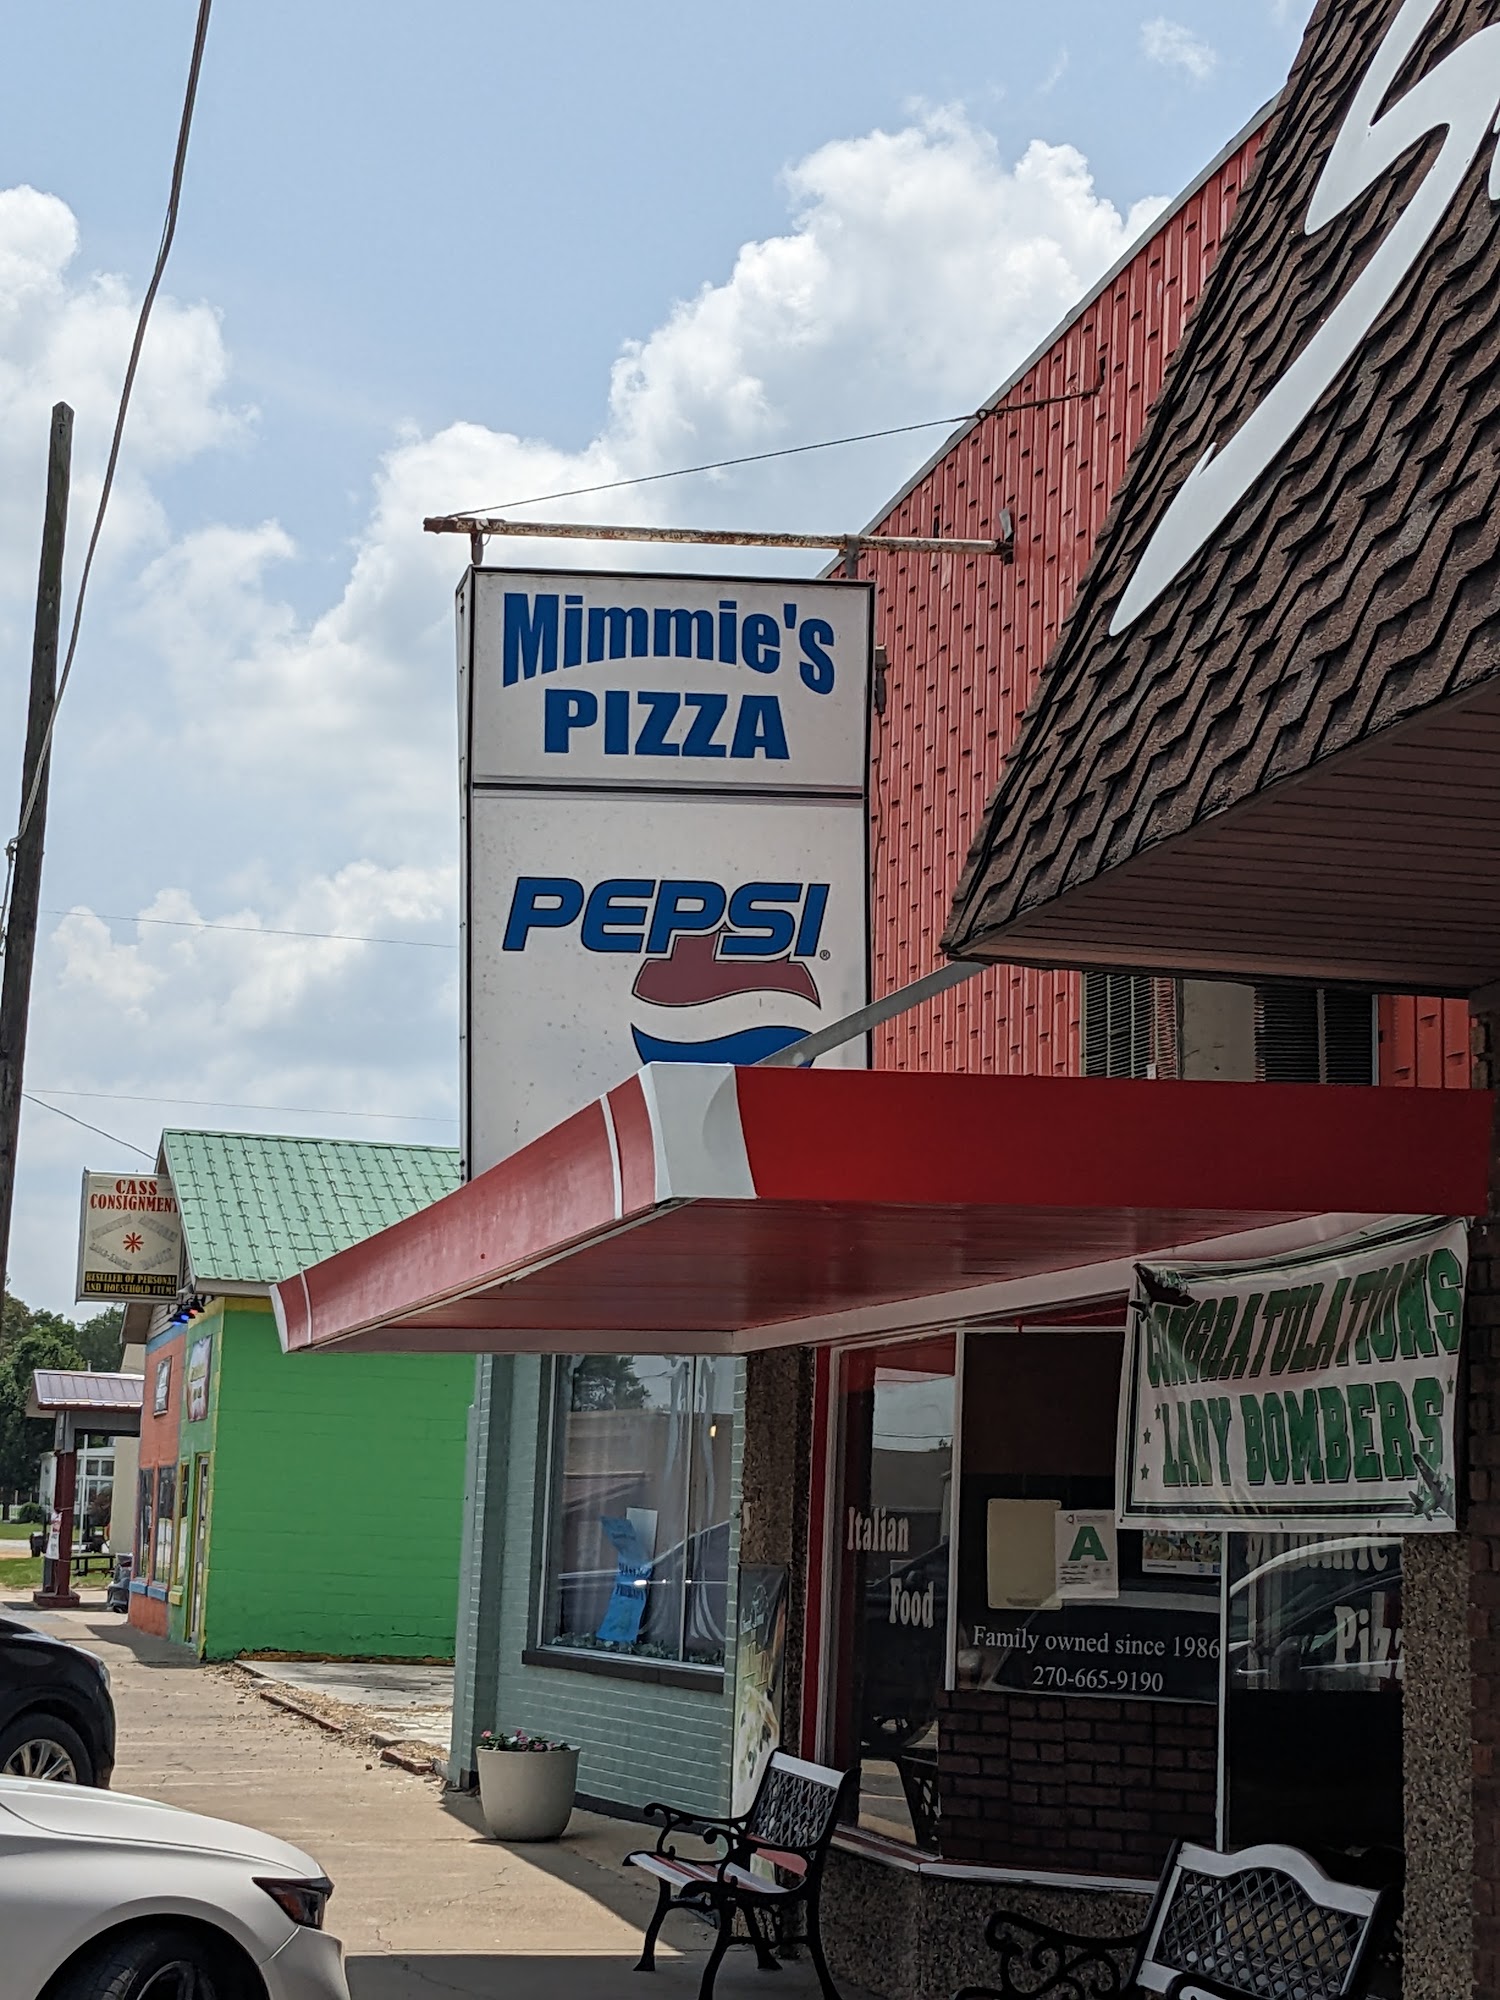 Mimmie's Pizza